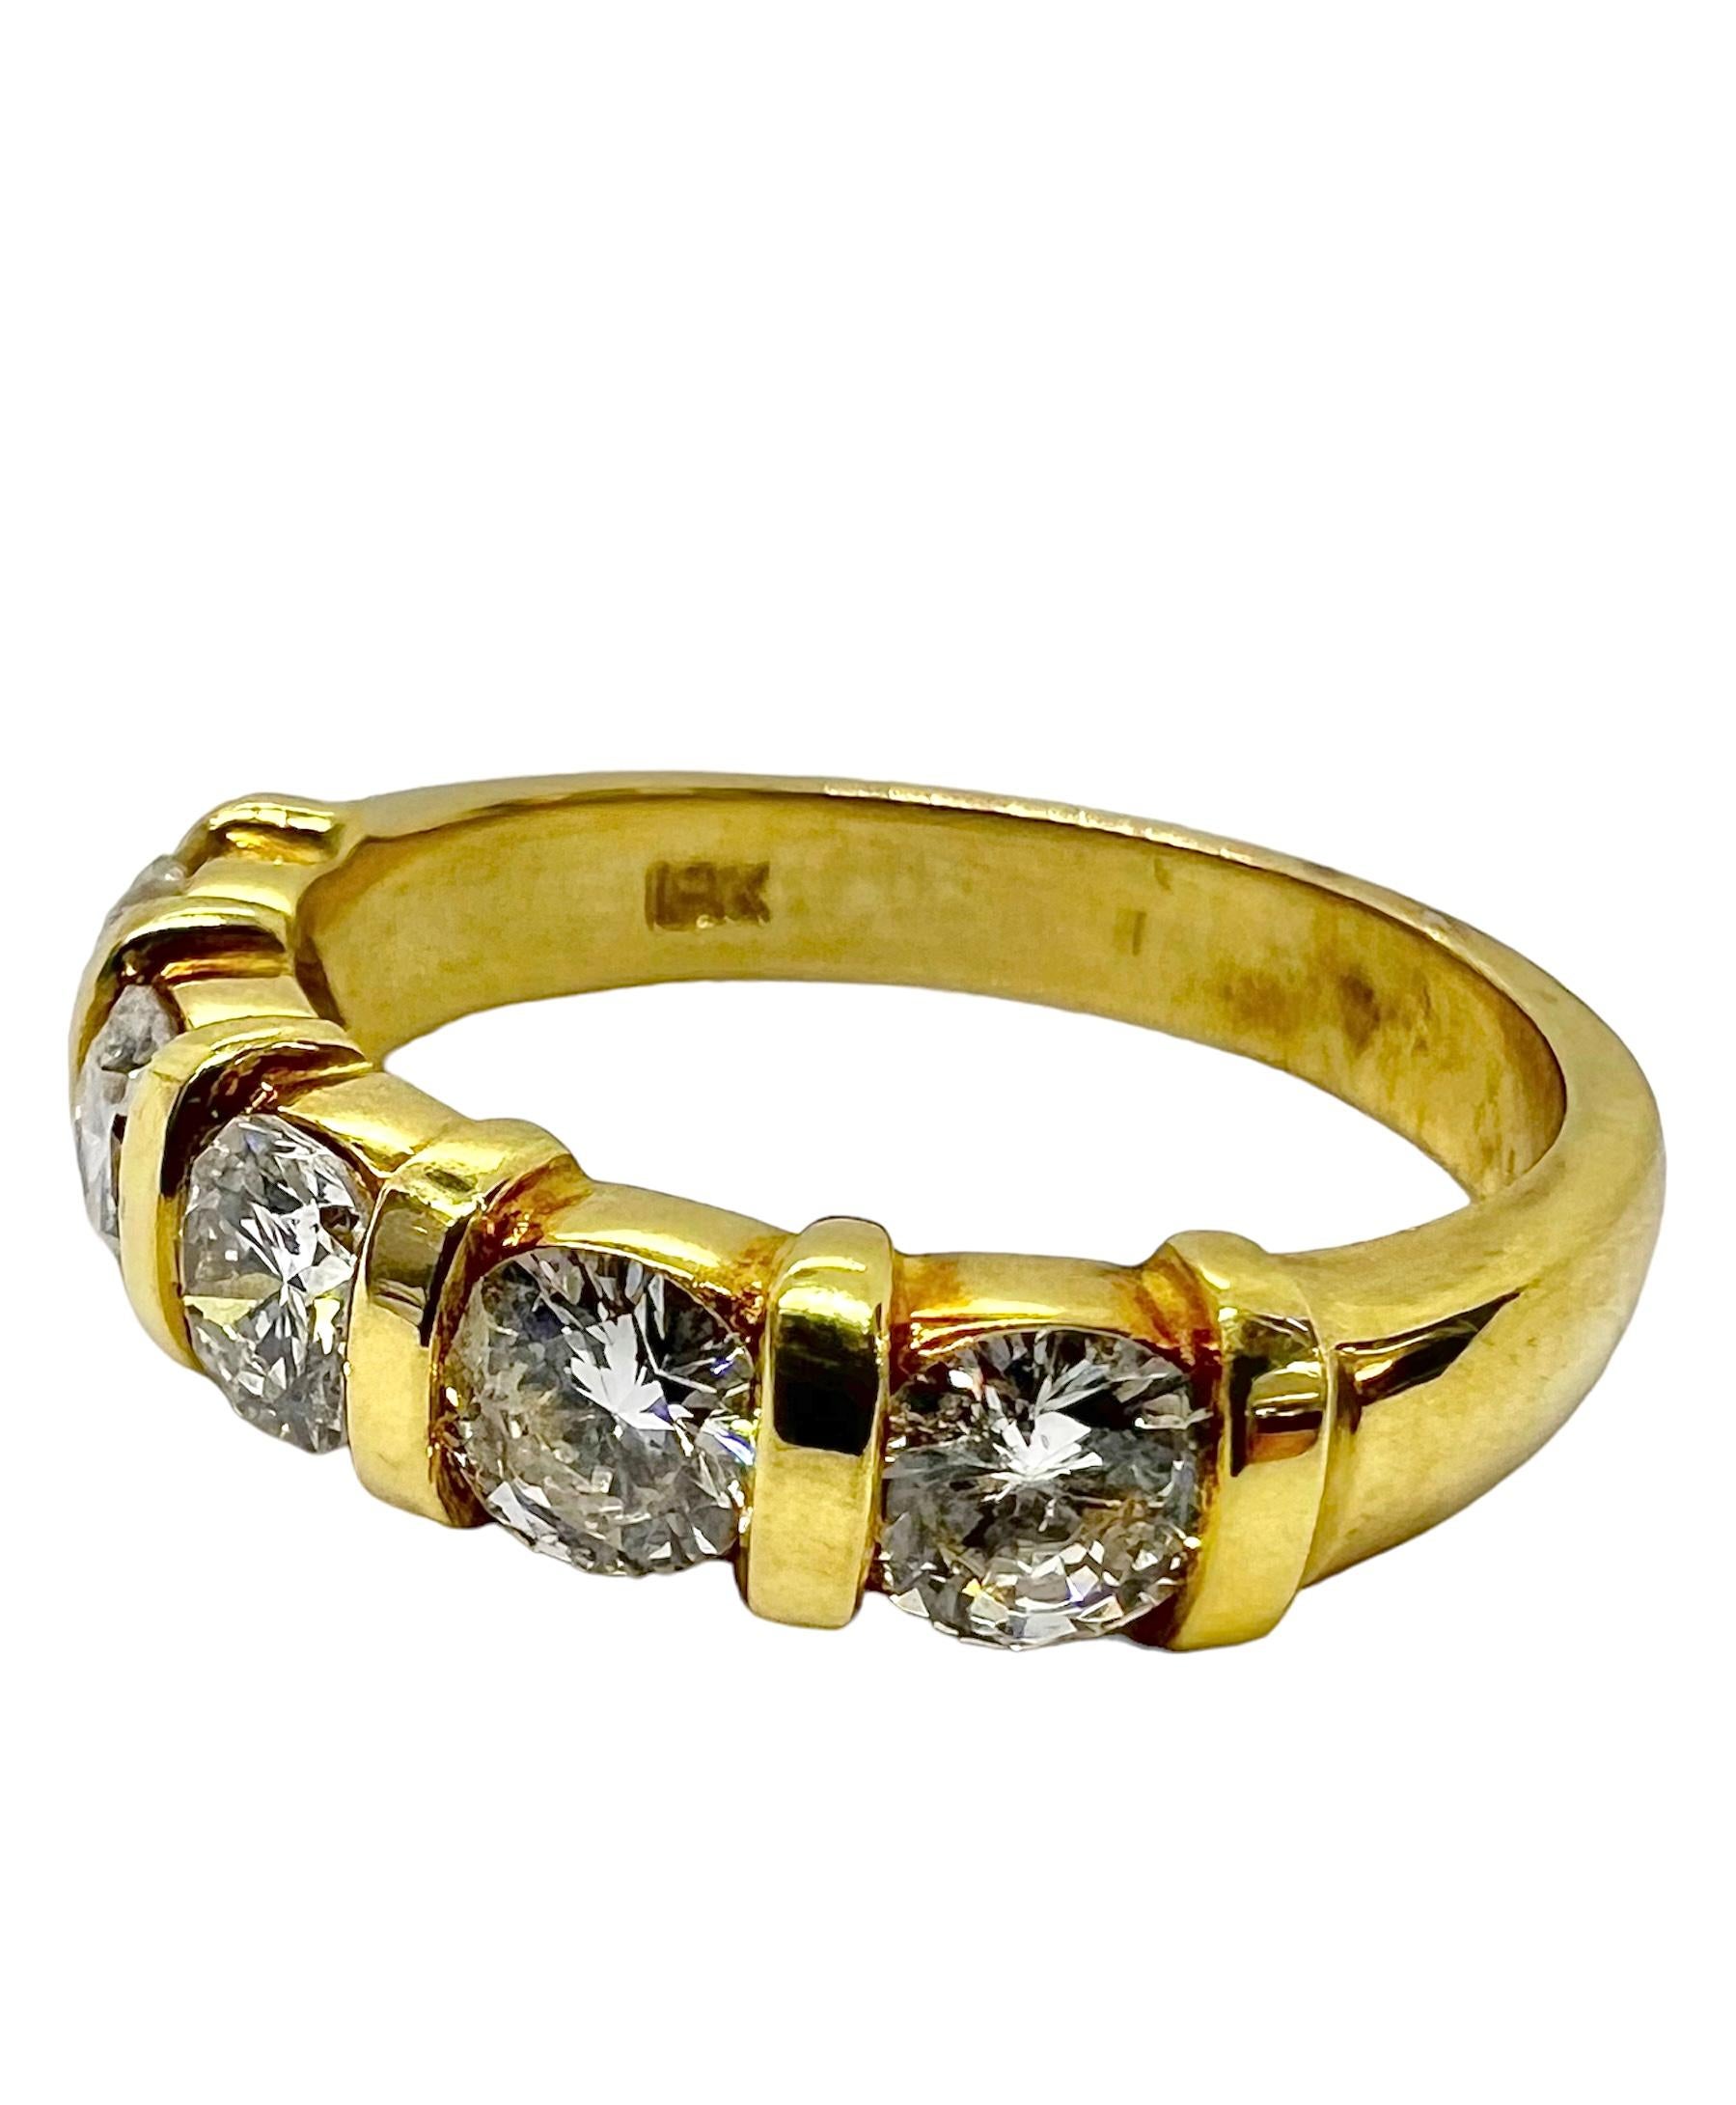 18K yellow gold ring with round diamonds.

Sophia D by Joseph Dardashti LTD has been known worldwide for 35 years and are inspired by classic Art Deco design that merges with modern manufacturing techniques.